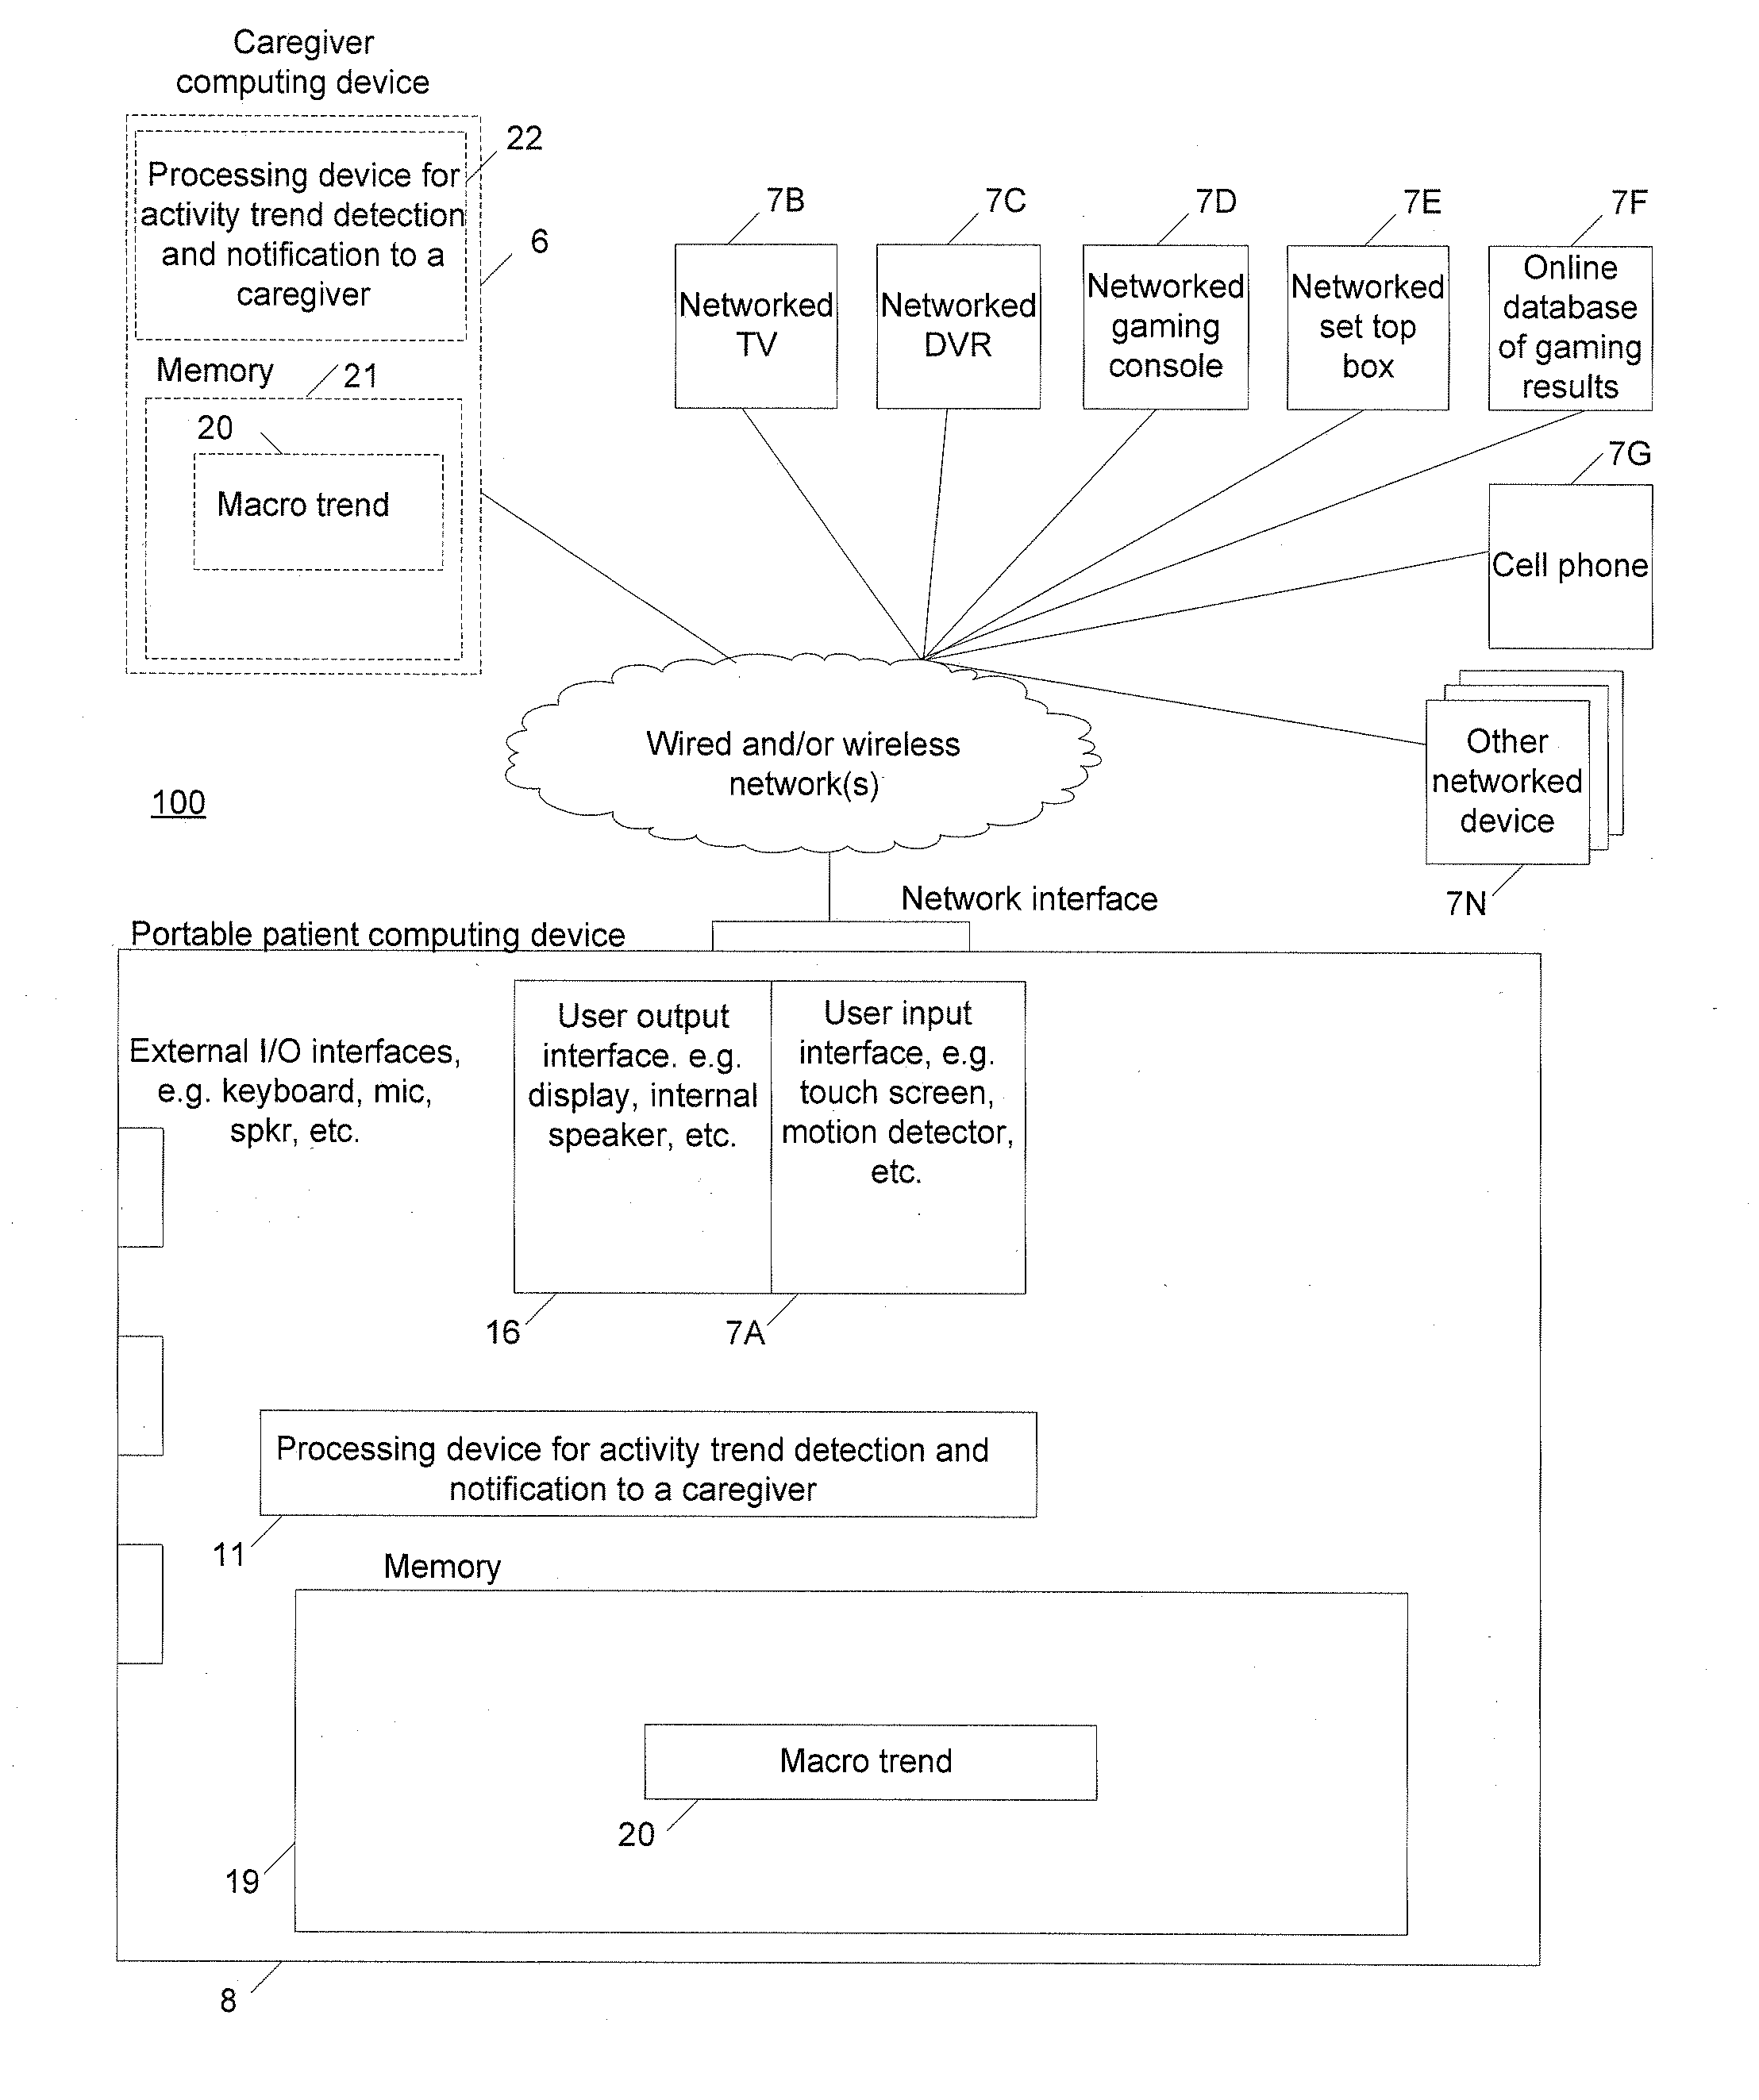 Activity trend detection and notification to a caregiver